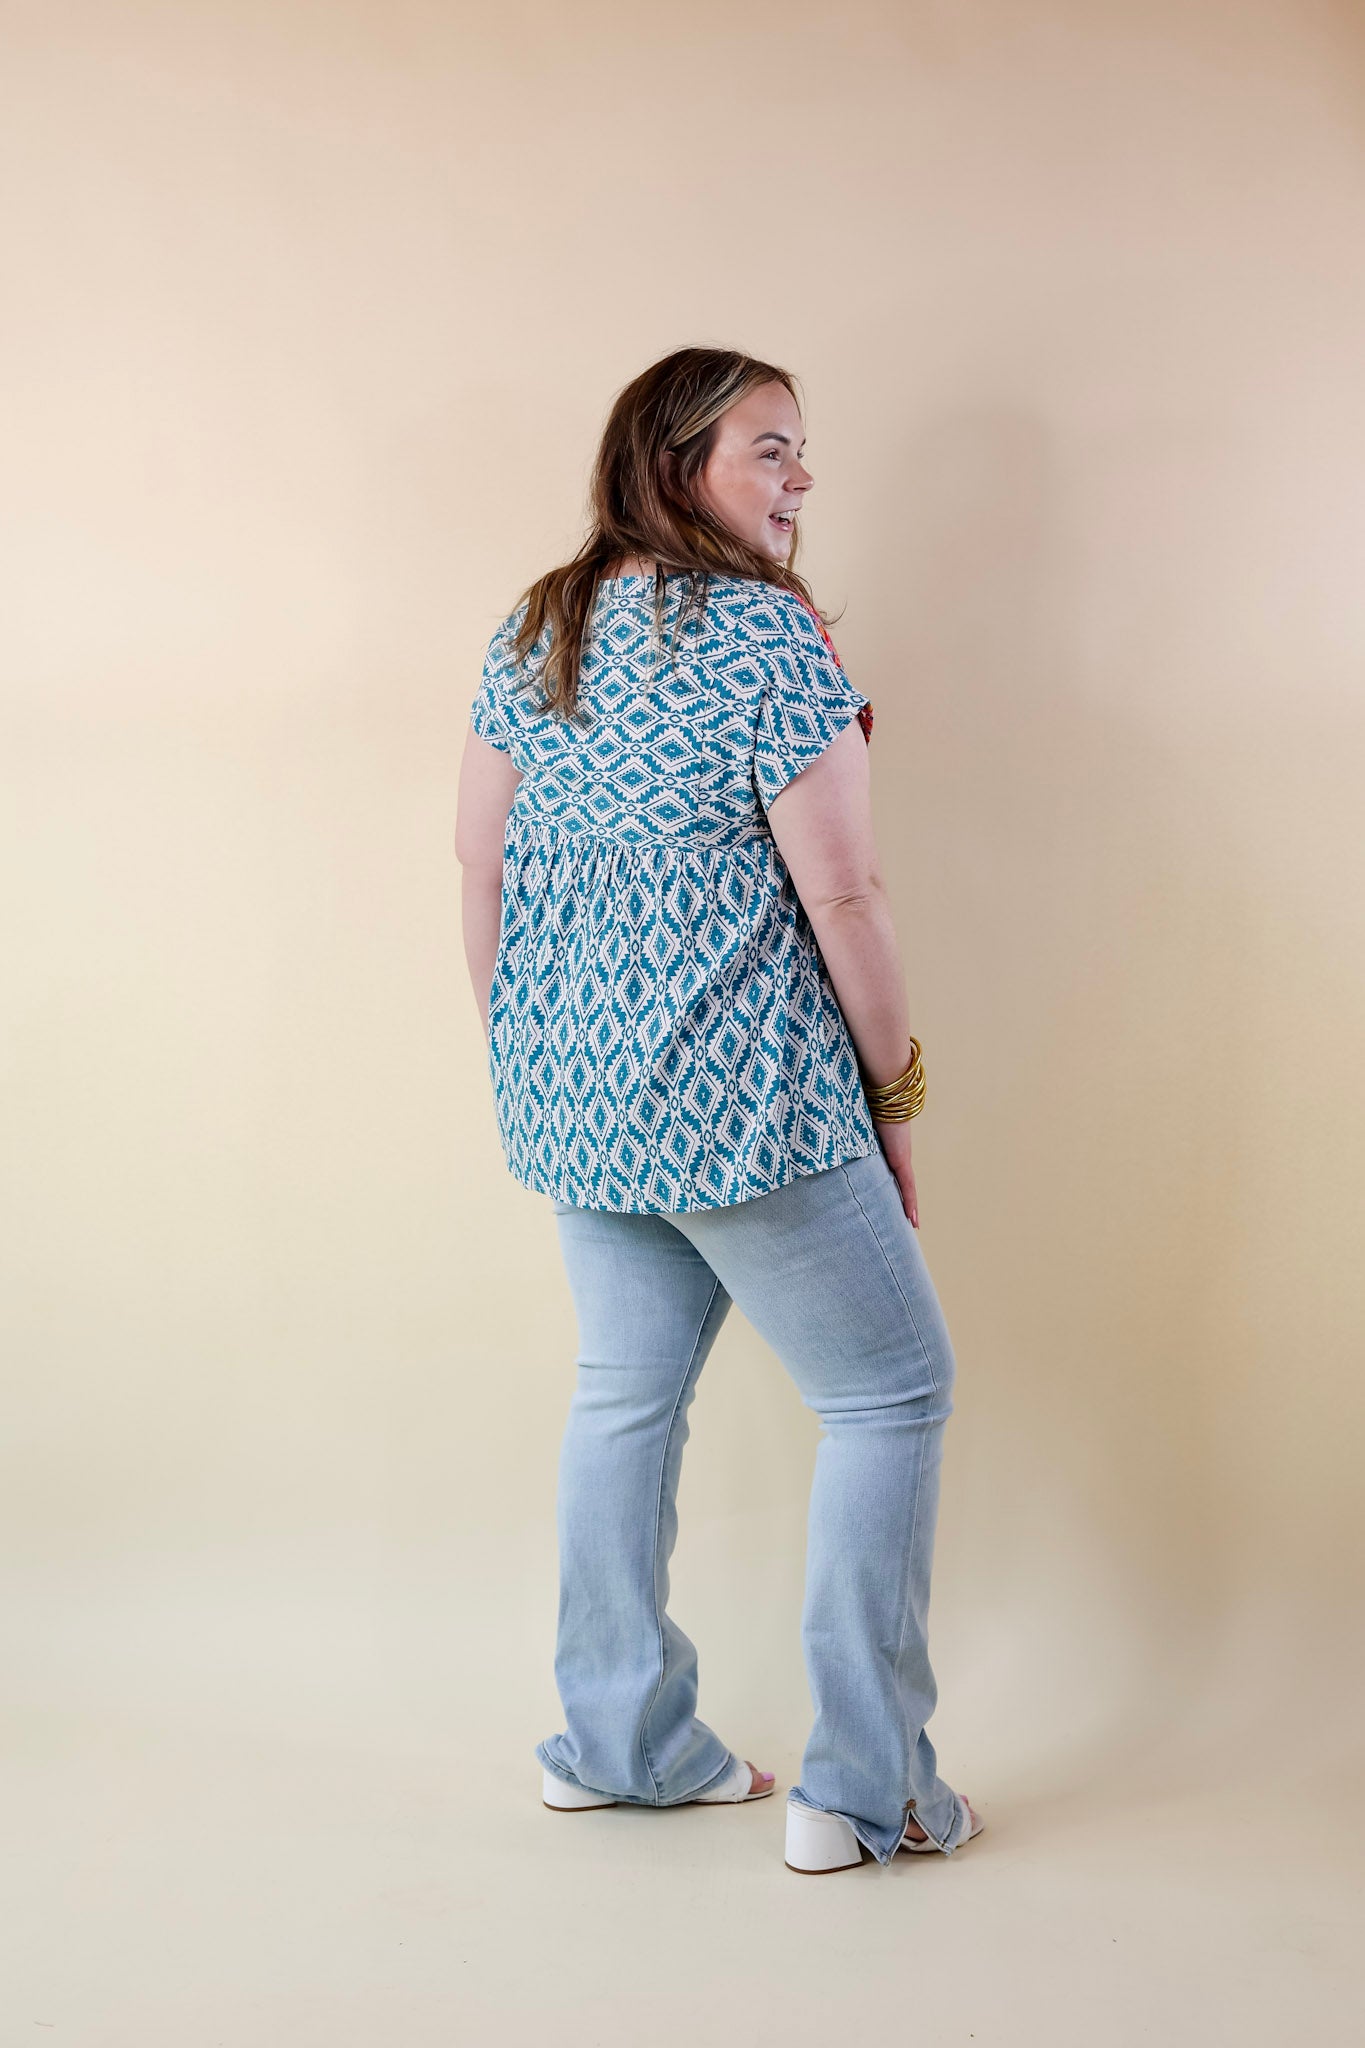 Fredericksburg In the Spring Aztec Print Embroidered Top with Front Keyhole in Turquoise Blue - Giddy Up Glamour Boutique